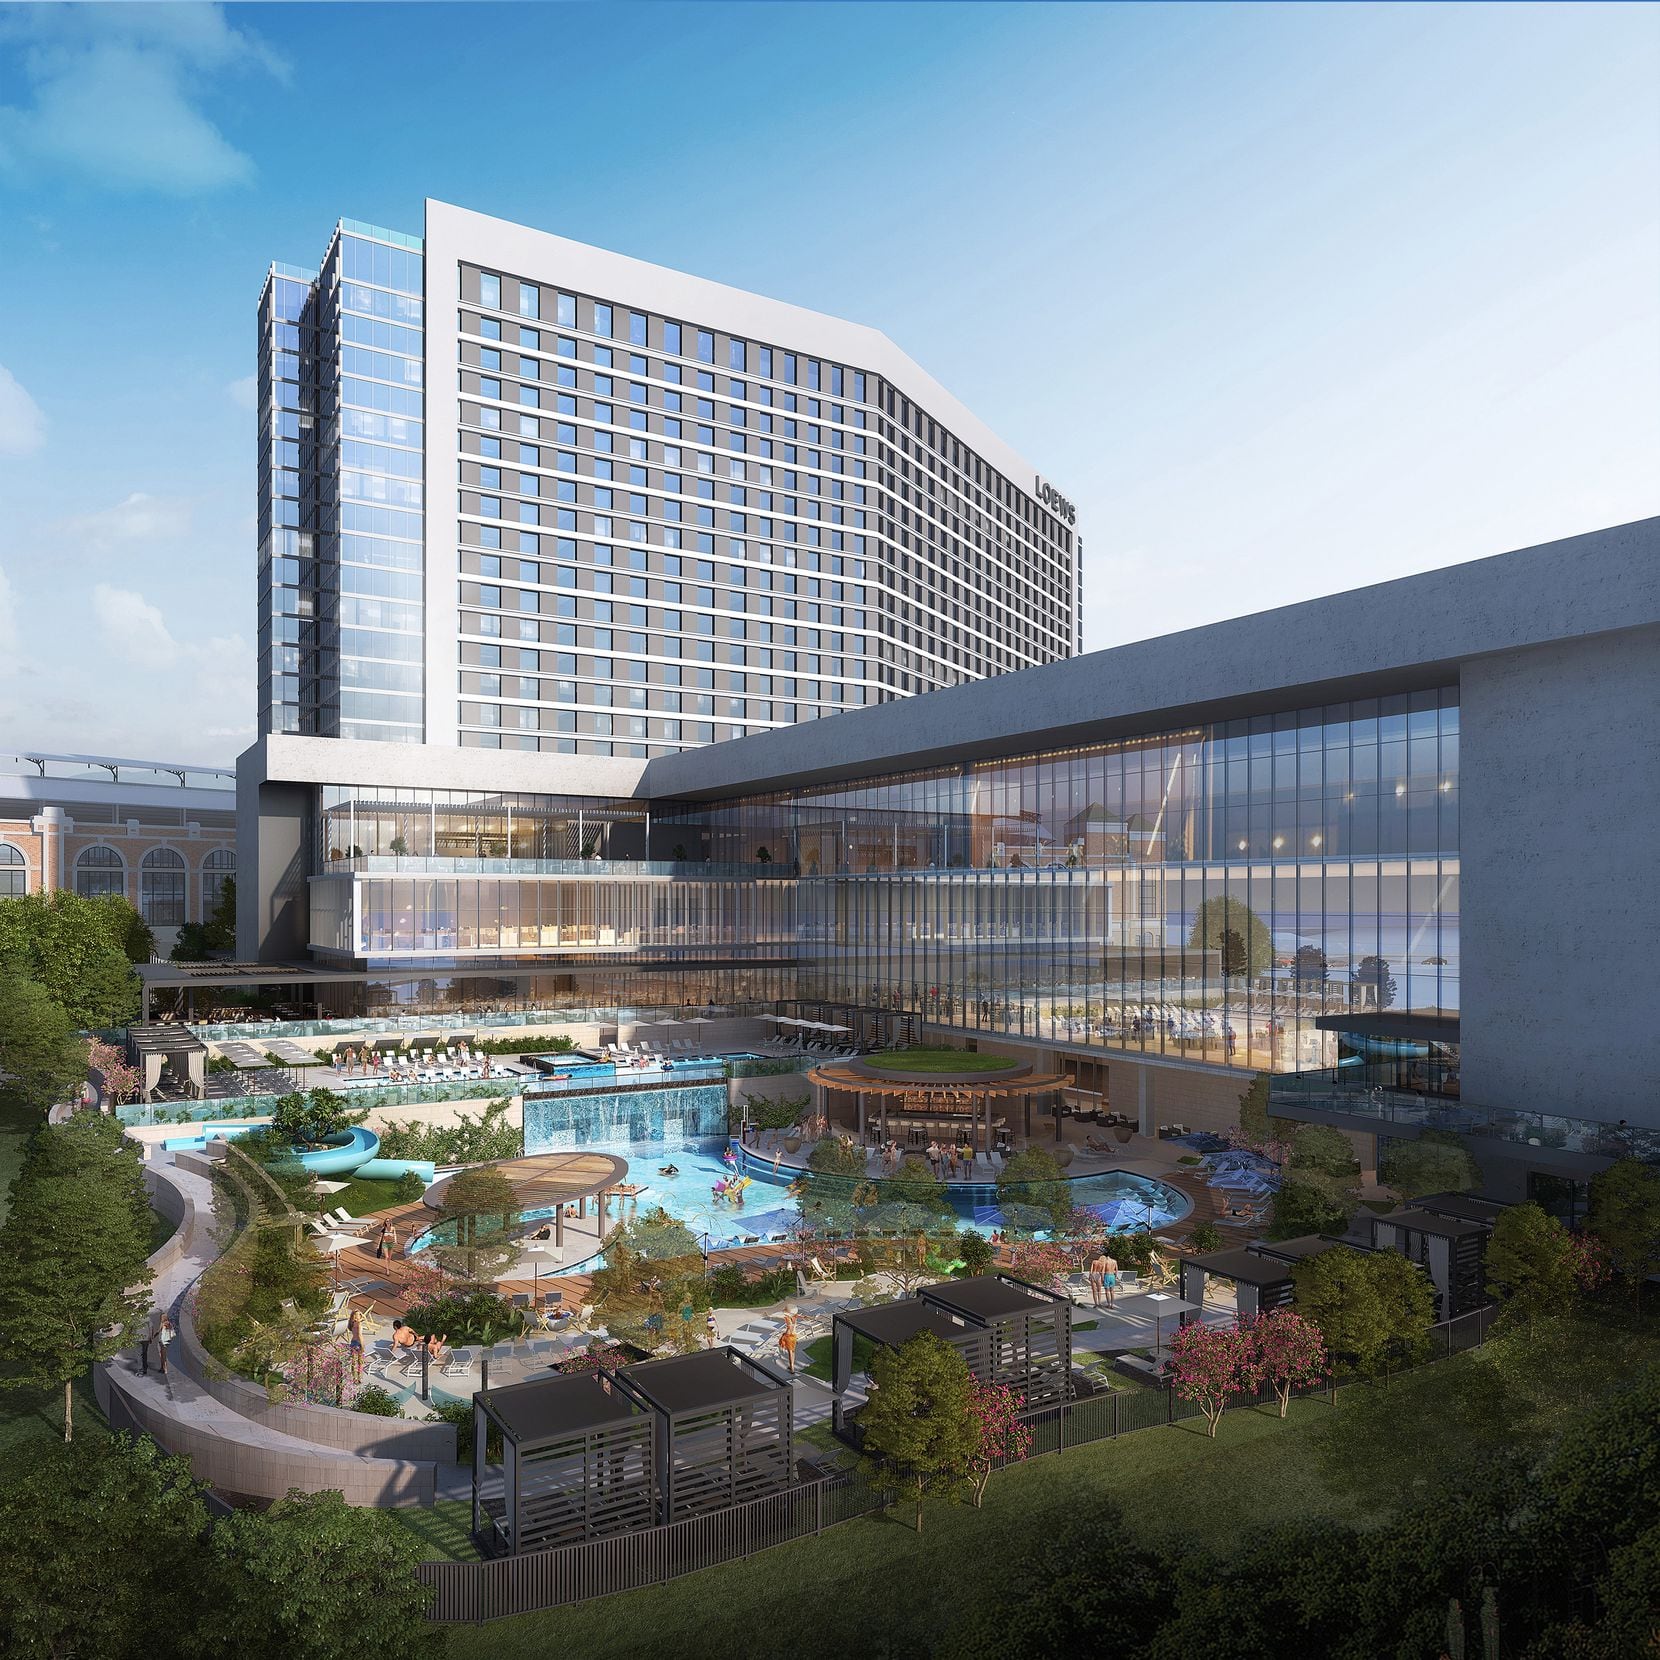 The Loews Arlington Hotel will have nearly 900 rooms designed for guests traveling for business and leisure.